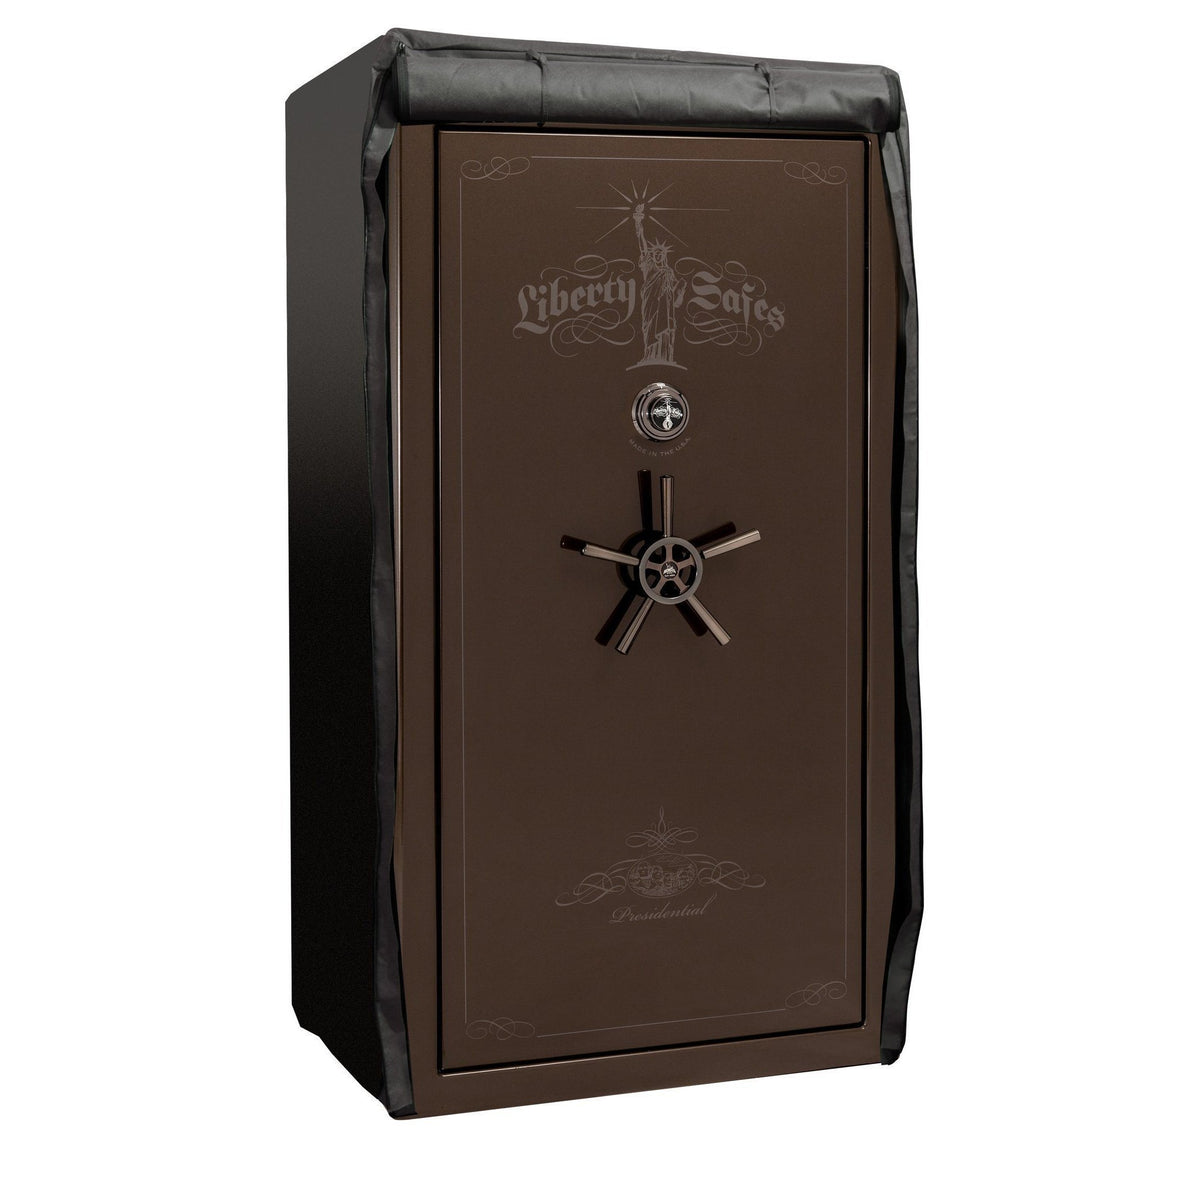 Accessory - Security - Safe Cover - 40 size safes | Liberty Safe Norcal.